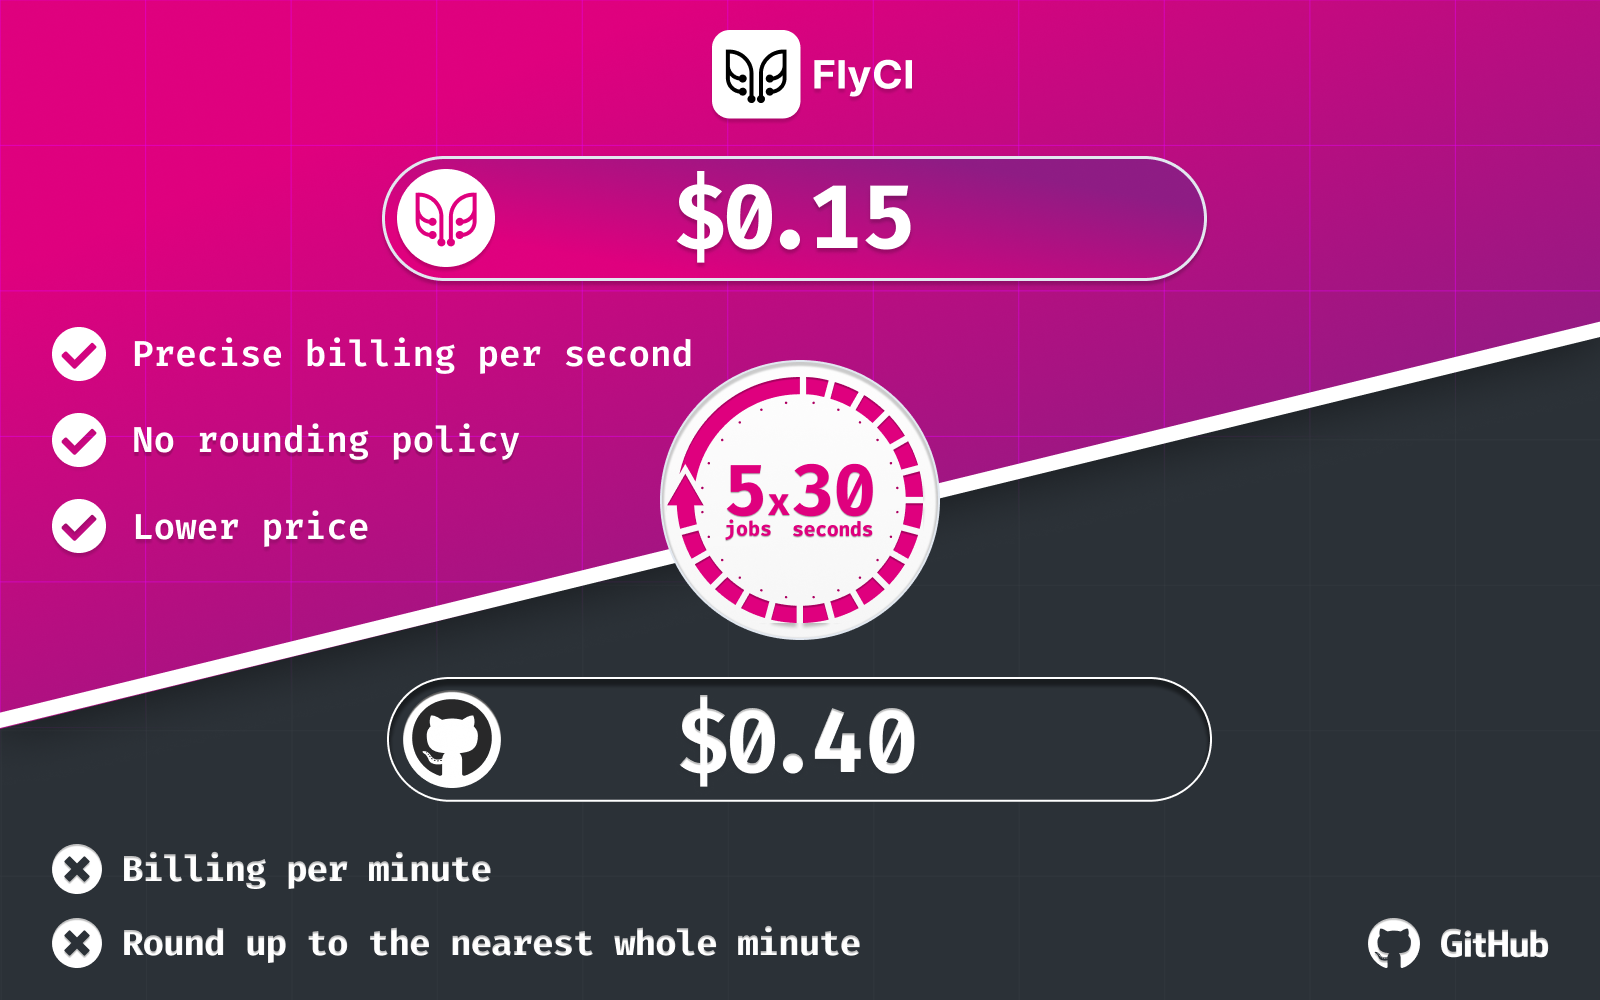 The benefits of FlyCI billing - precise billing per second, no rounding policy, lower price and an example of $0.15 for a workflow having 5 jobs per 30 seconds each. All this is compared to GitHub's price of $0.40 for the same workflow with disadvantages outlined - Billing per minute and rounding up to the nearest whole minute.